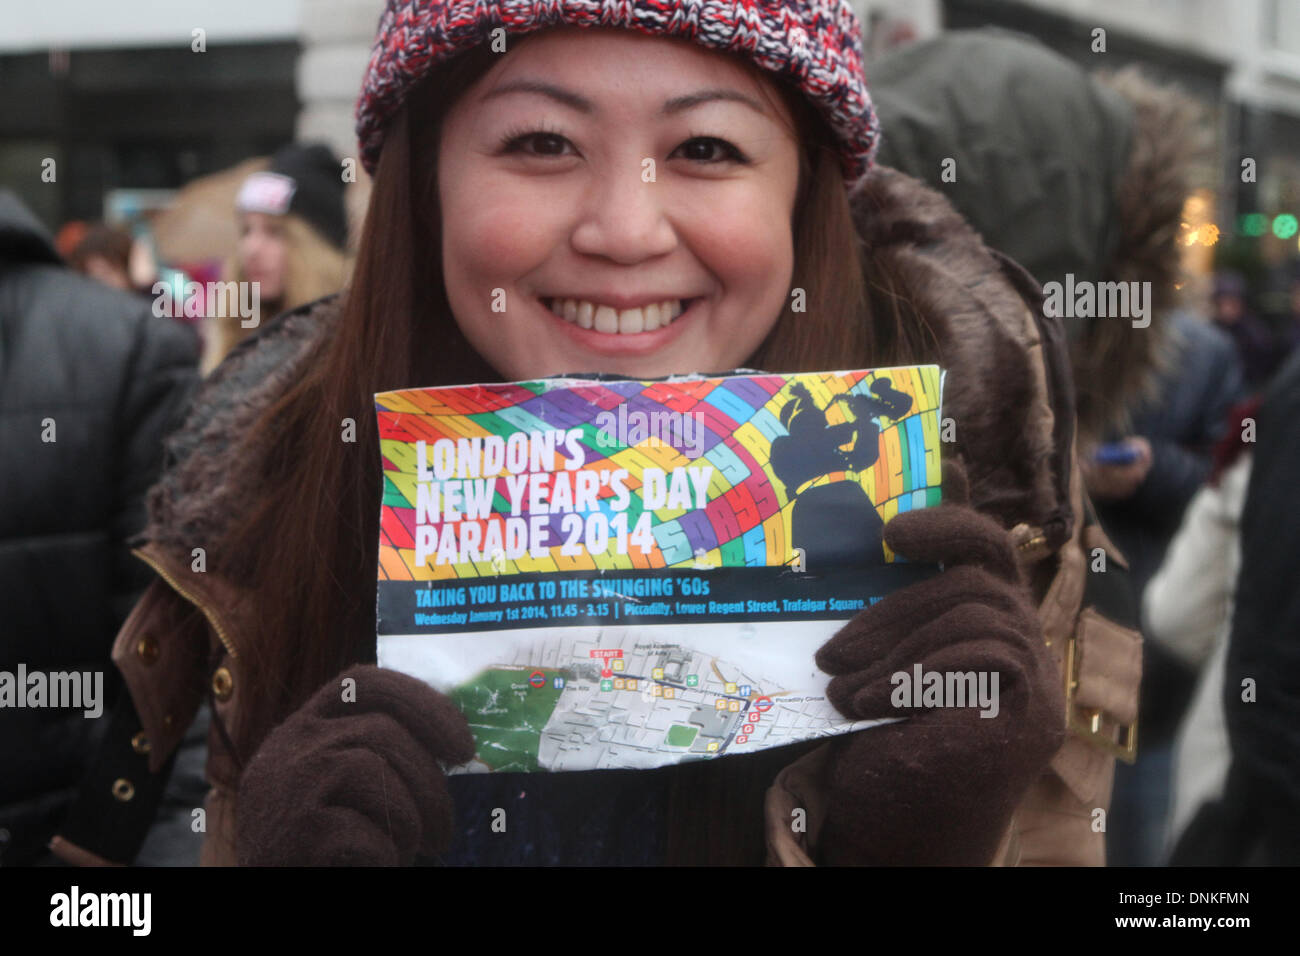 London,UK,1st January 2014,Waiting, despite the rain, for the London's New Year's Day Parade 2014 Credit: Keith Larby/Alamy Live News Stock Photo